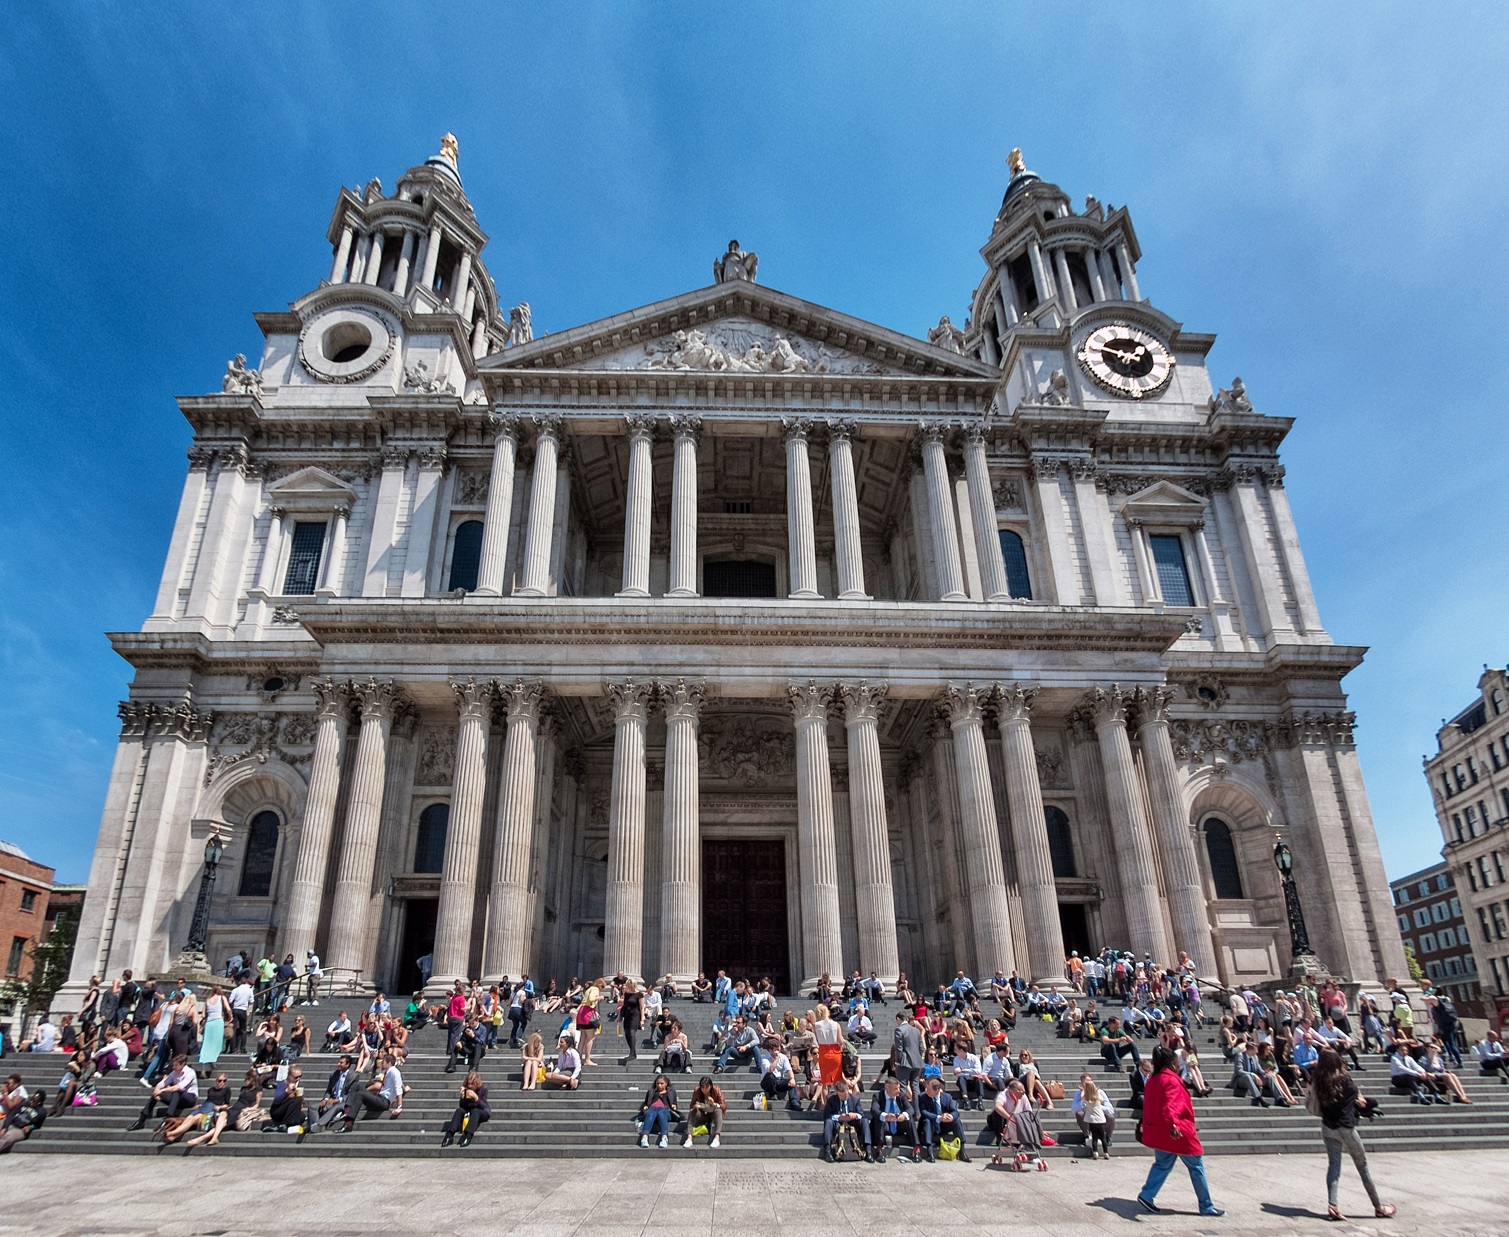 The West front of the cathedral showing lots of people sitting on the steps up to the cathedral, with a sunny blue sky overhead